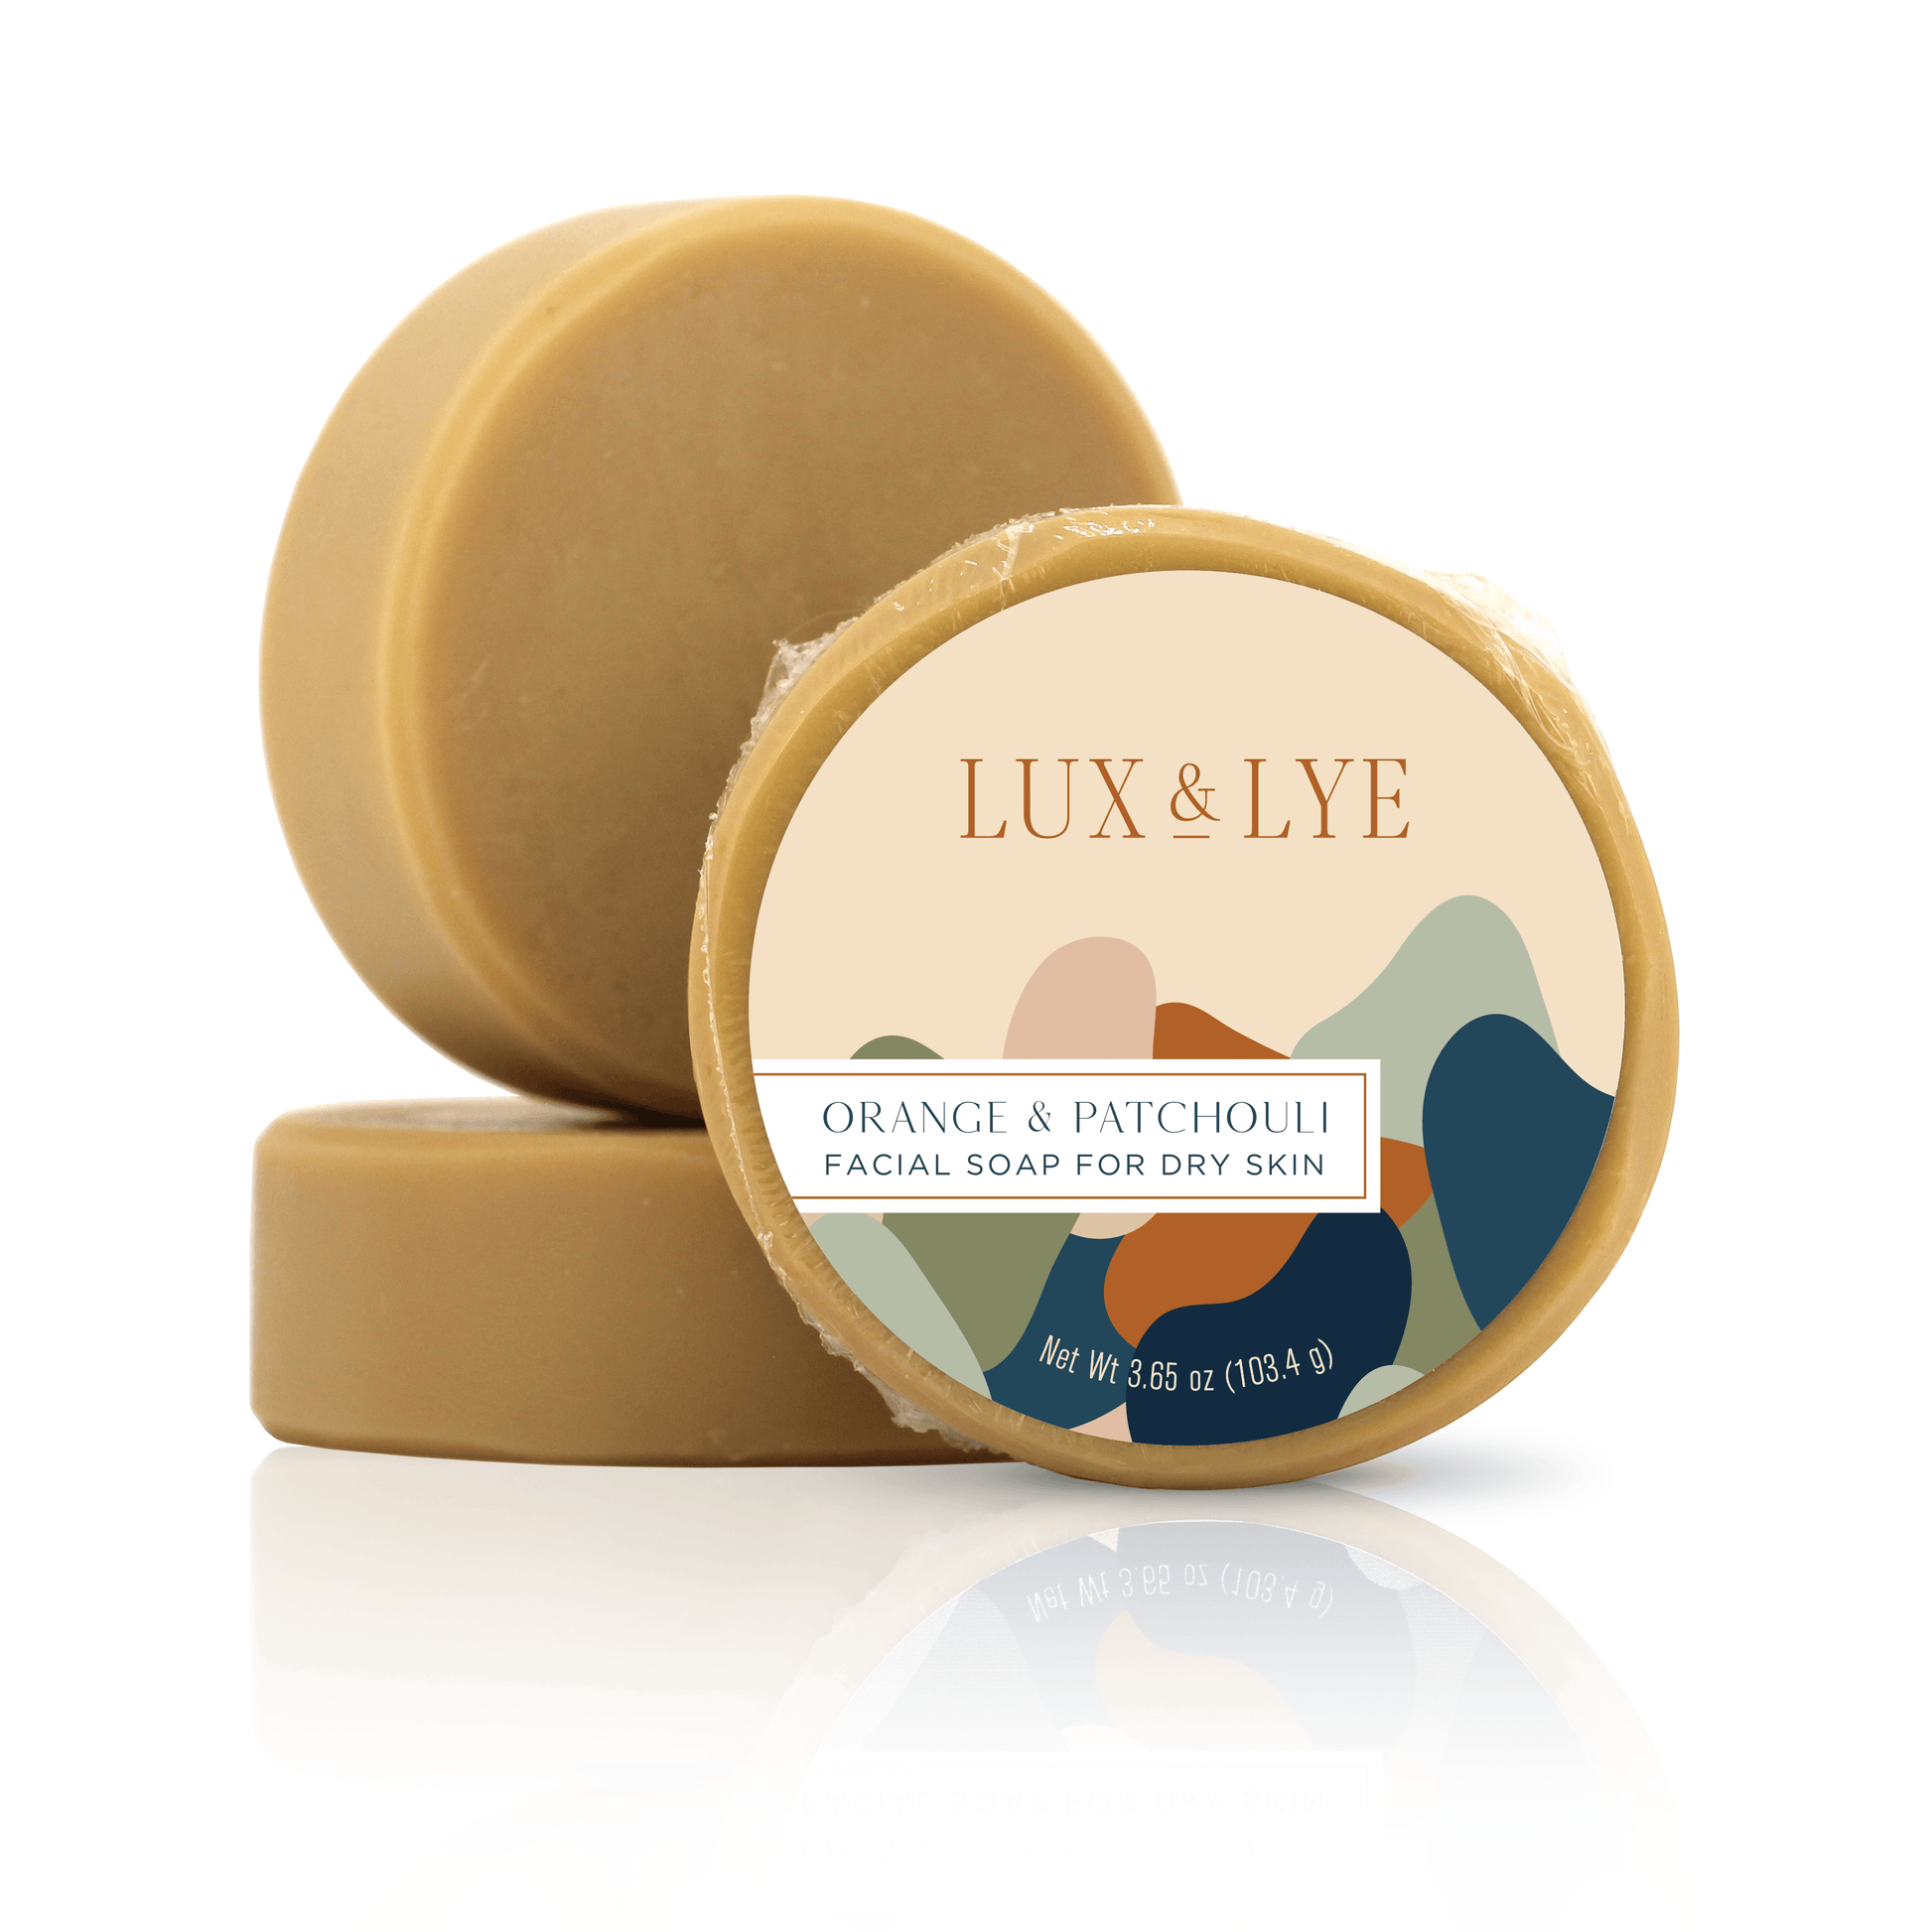 Orange & Patchouli Facial Soap (For Dry Skin) - Lux and Lye